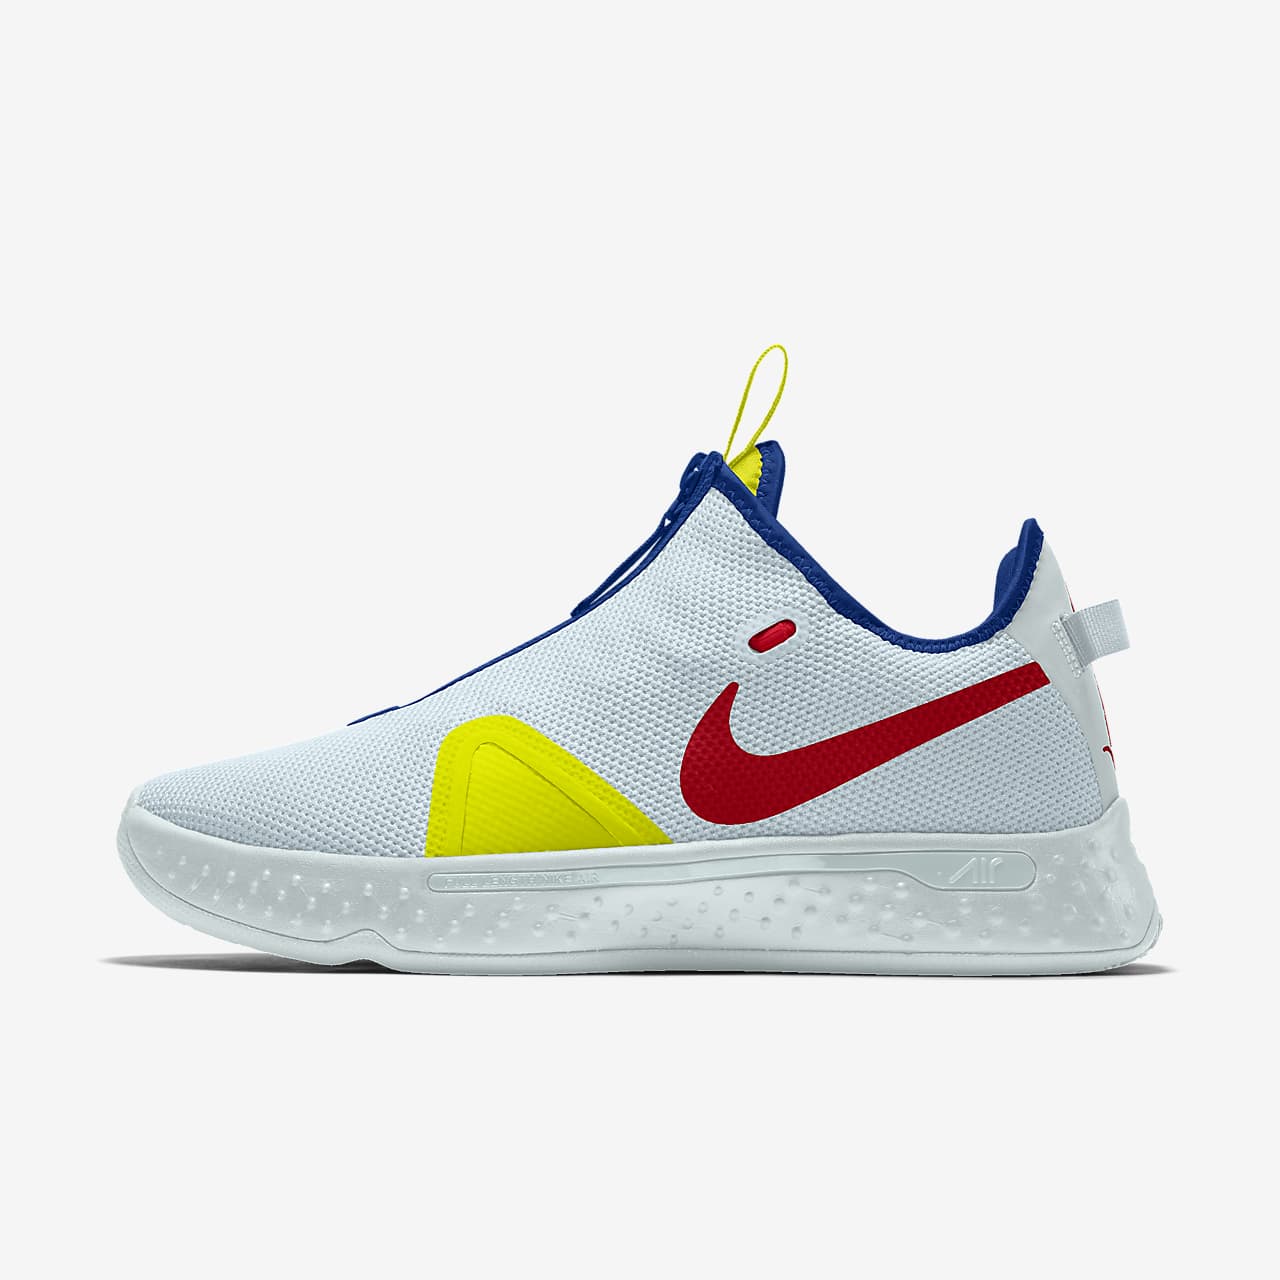 pg 4 by you nike